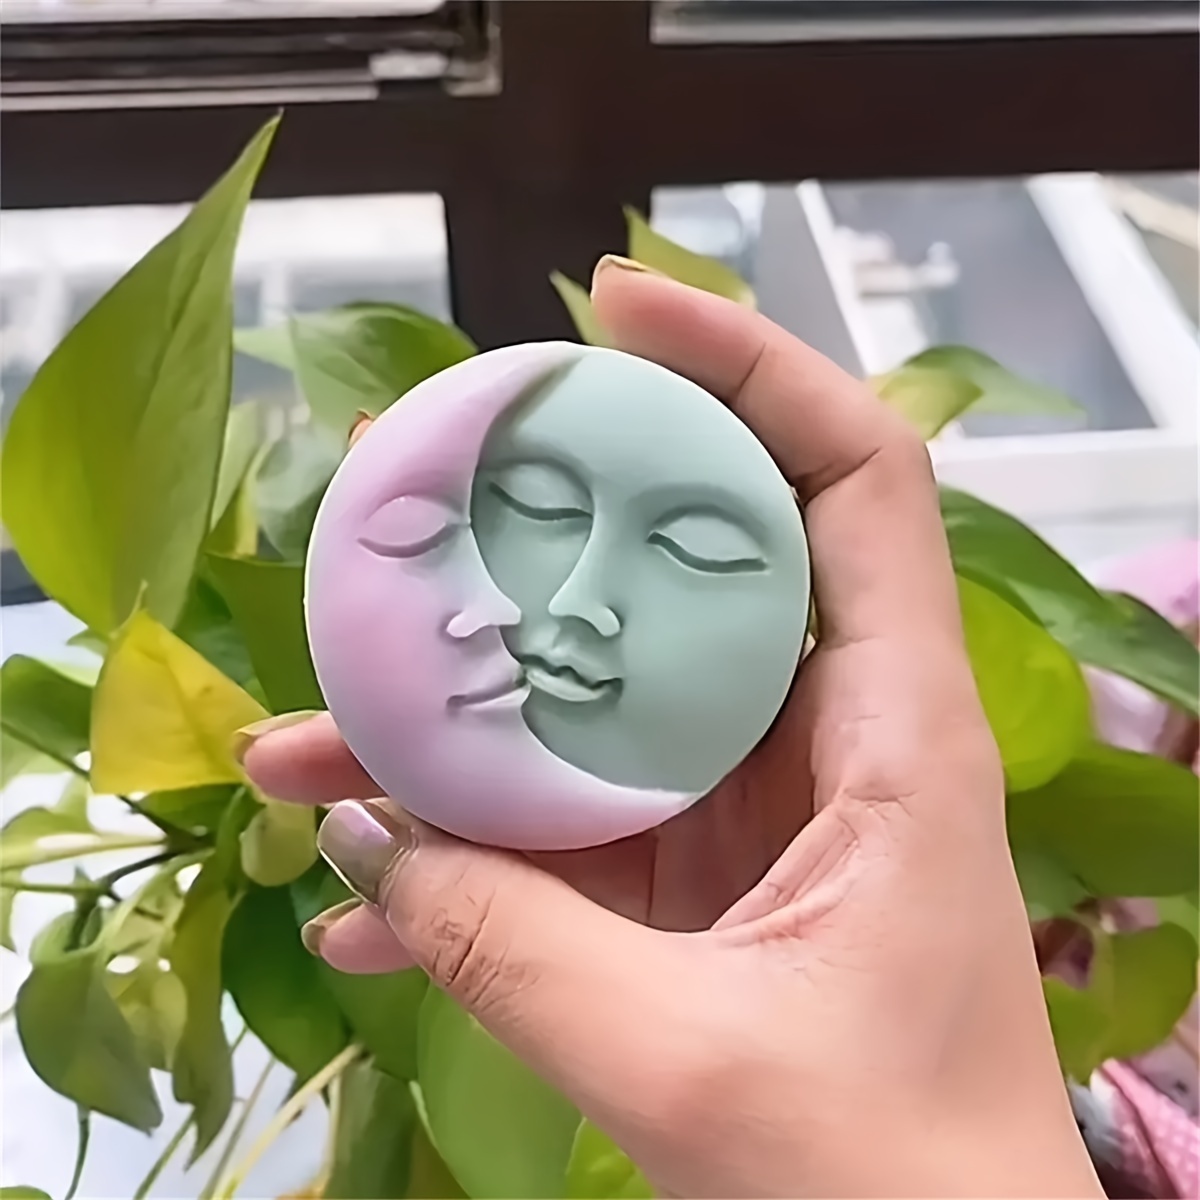 

1pc Moon Sun Face Candle Silicone Mold Diy Handmade Craft Candle Making Supplies Middle East Ramadan Moon Festival Decoration